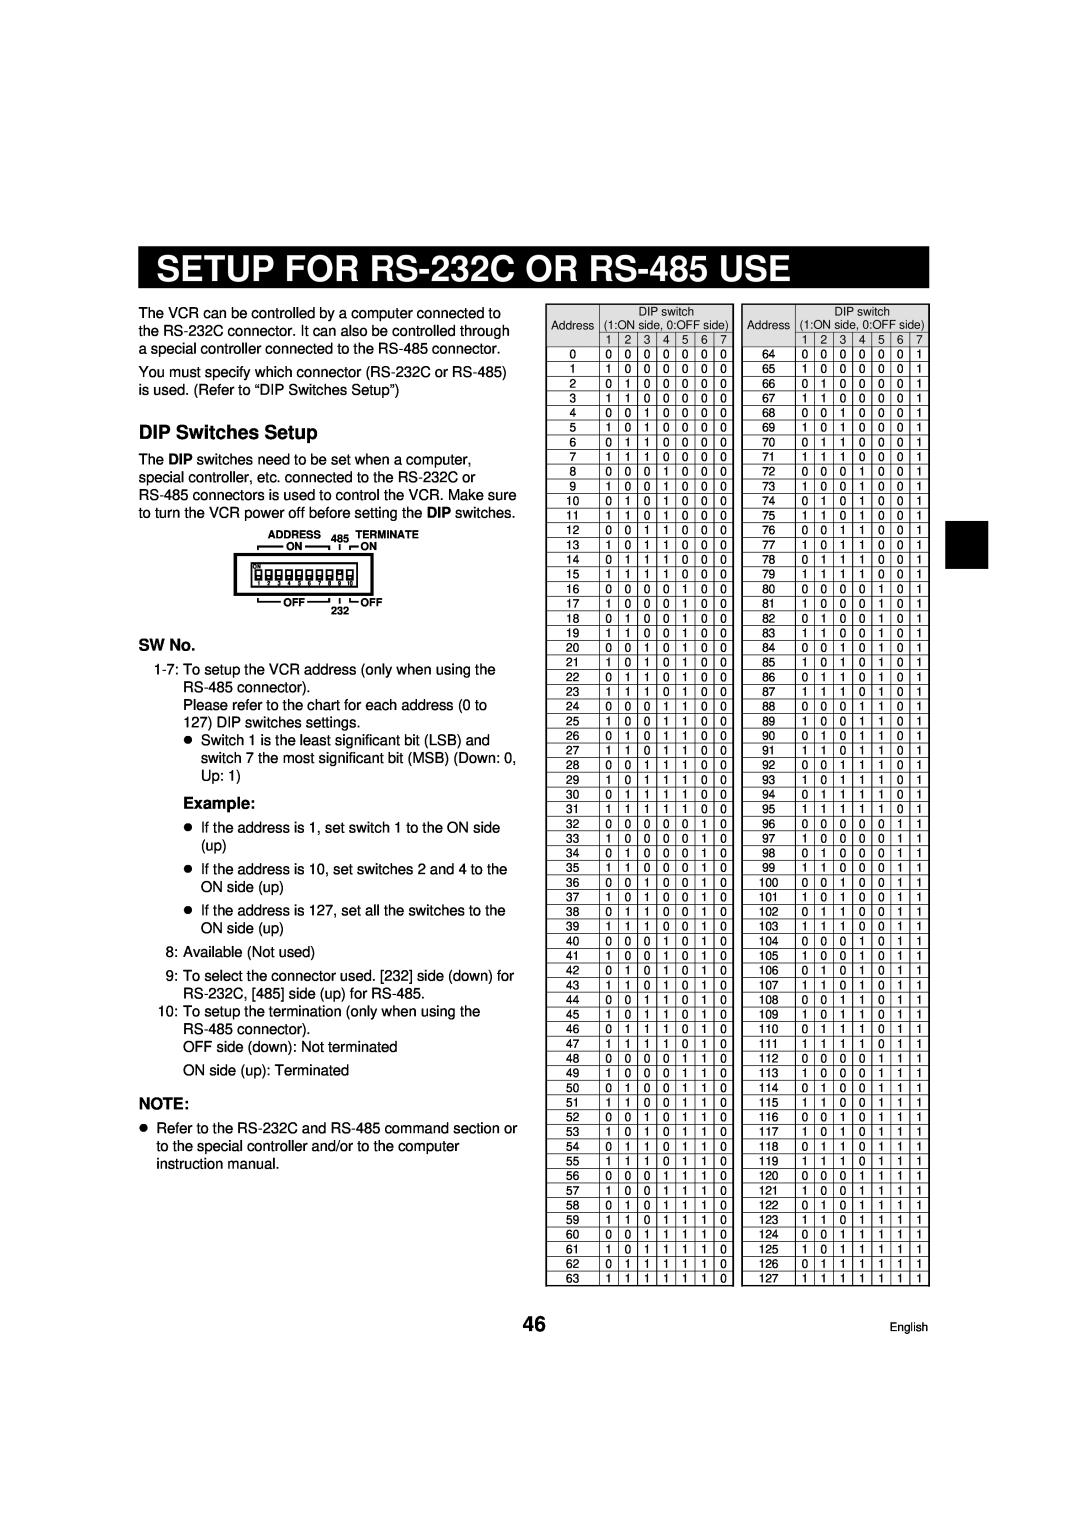 Sanyo RD2QD/NA, DTL-4800 instruction manual SETUP FOR RS-232C OR RS-485 USE, DIP Switches Setup, SW No, Example 